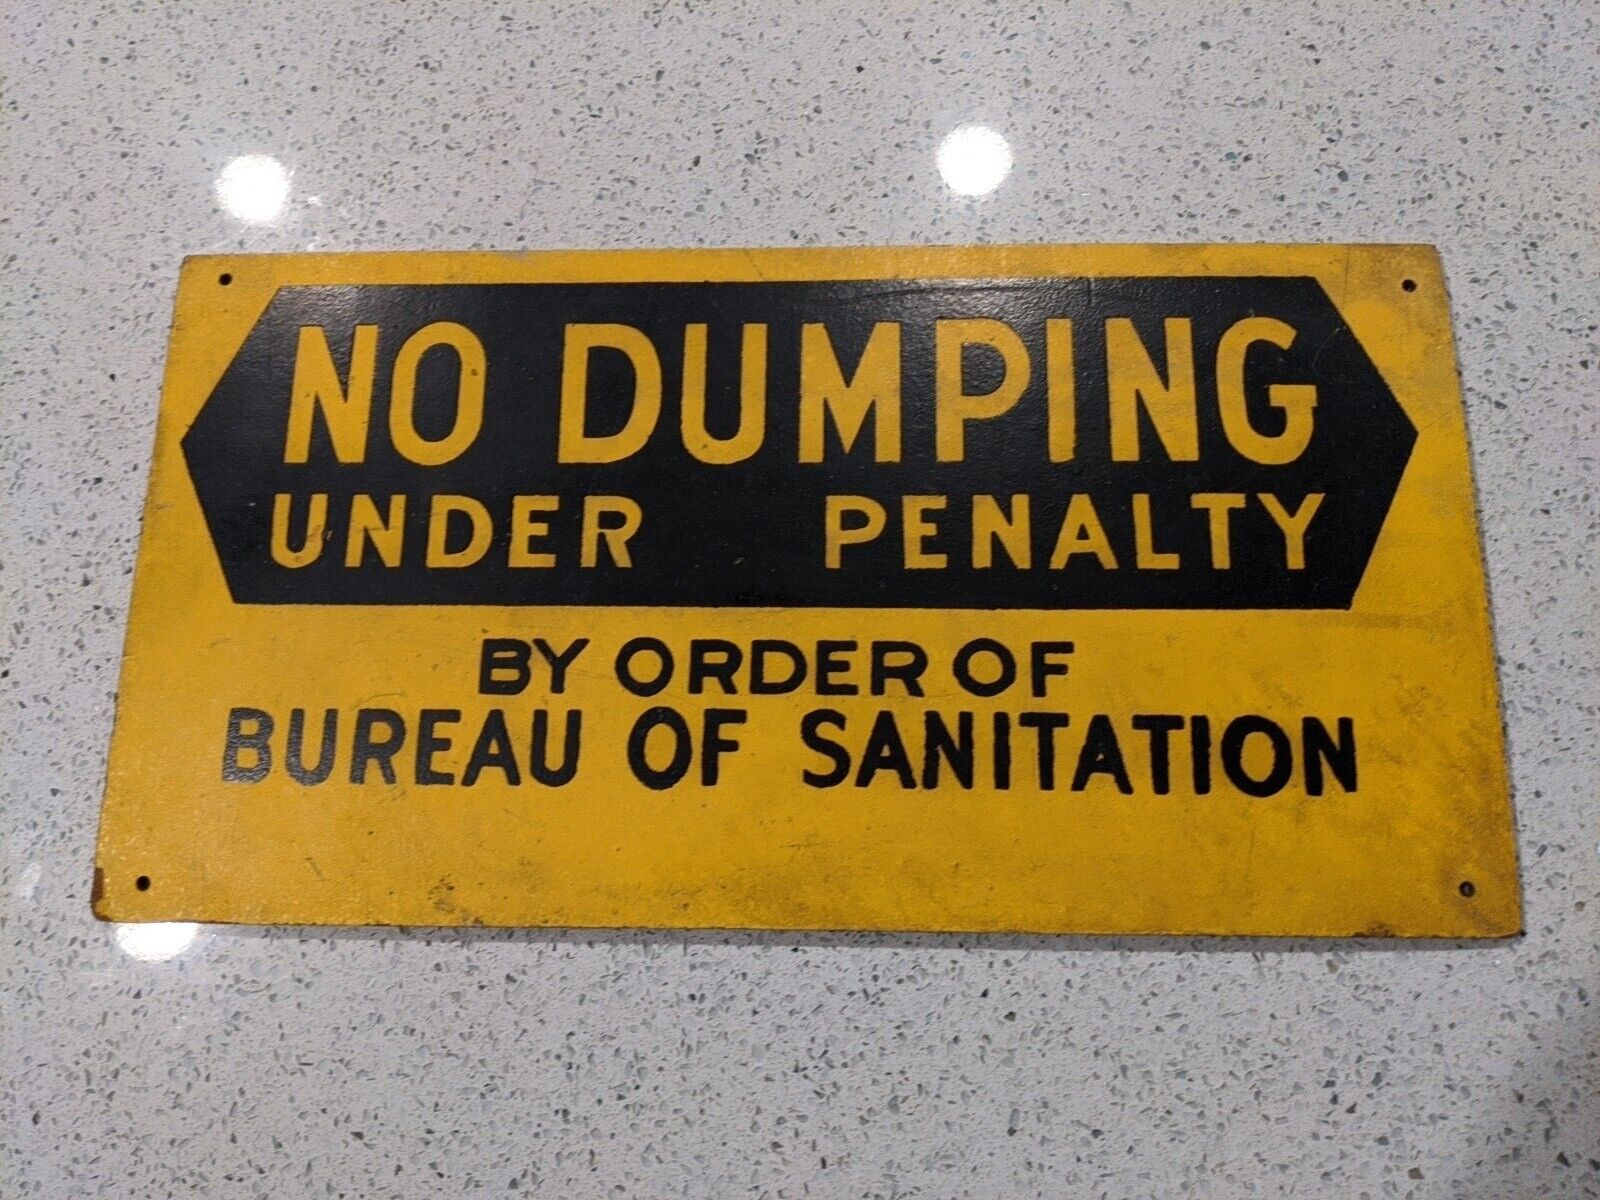  NO DUMPING UNDER PENALTY BY ORDER OF B.O.S. Stamped Yellow/Black Wood Sign. 